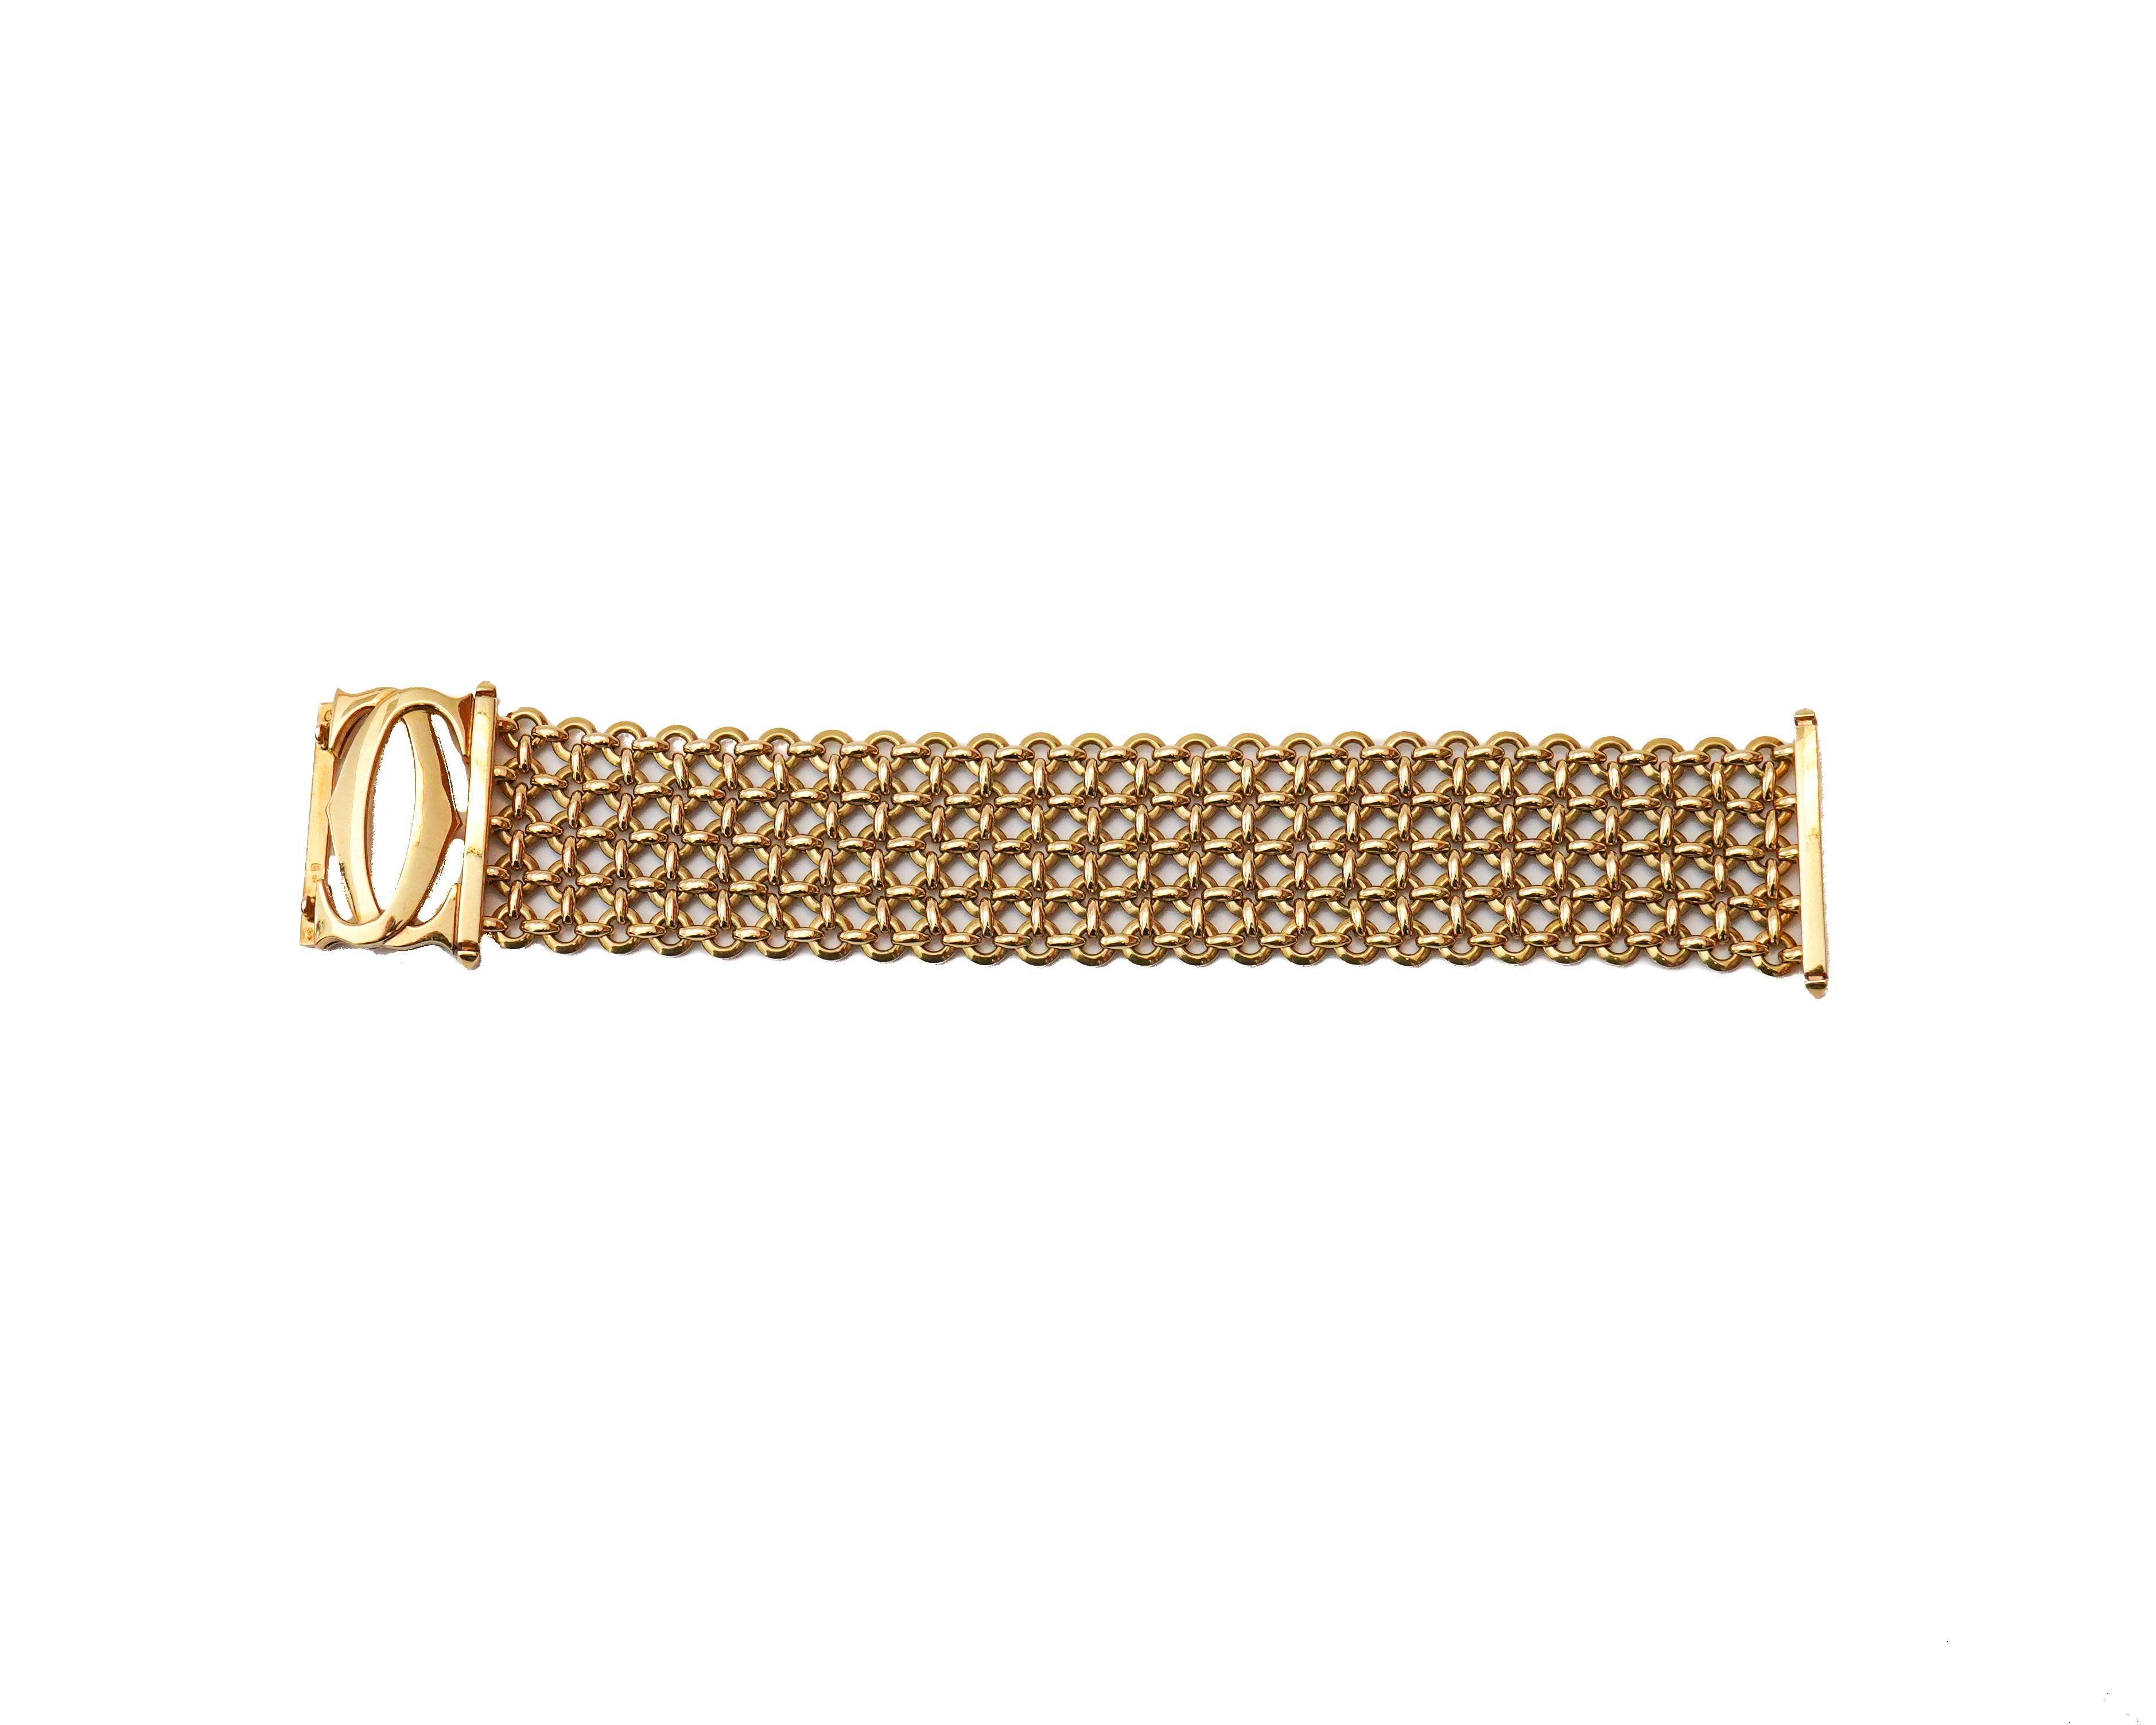 A great example of this amazing bracelet, in pristine condition with all hallmarks clearly visible.
The bracelet is made from 18kt yellow gold and weights in at 88.1 grams. The images show its perfect length and can be shortened easily upon